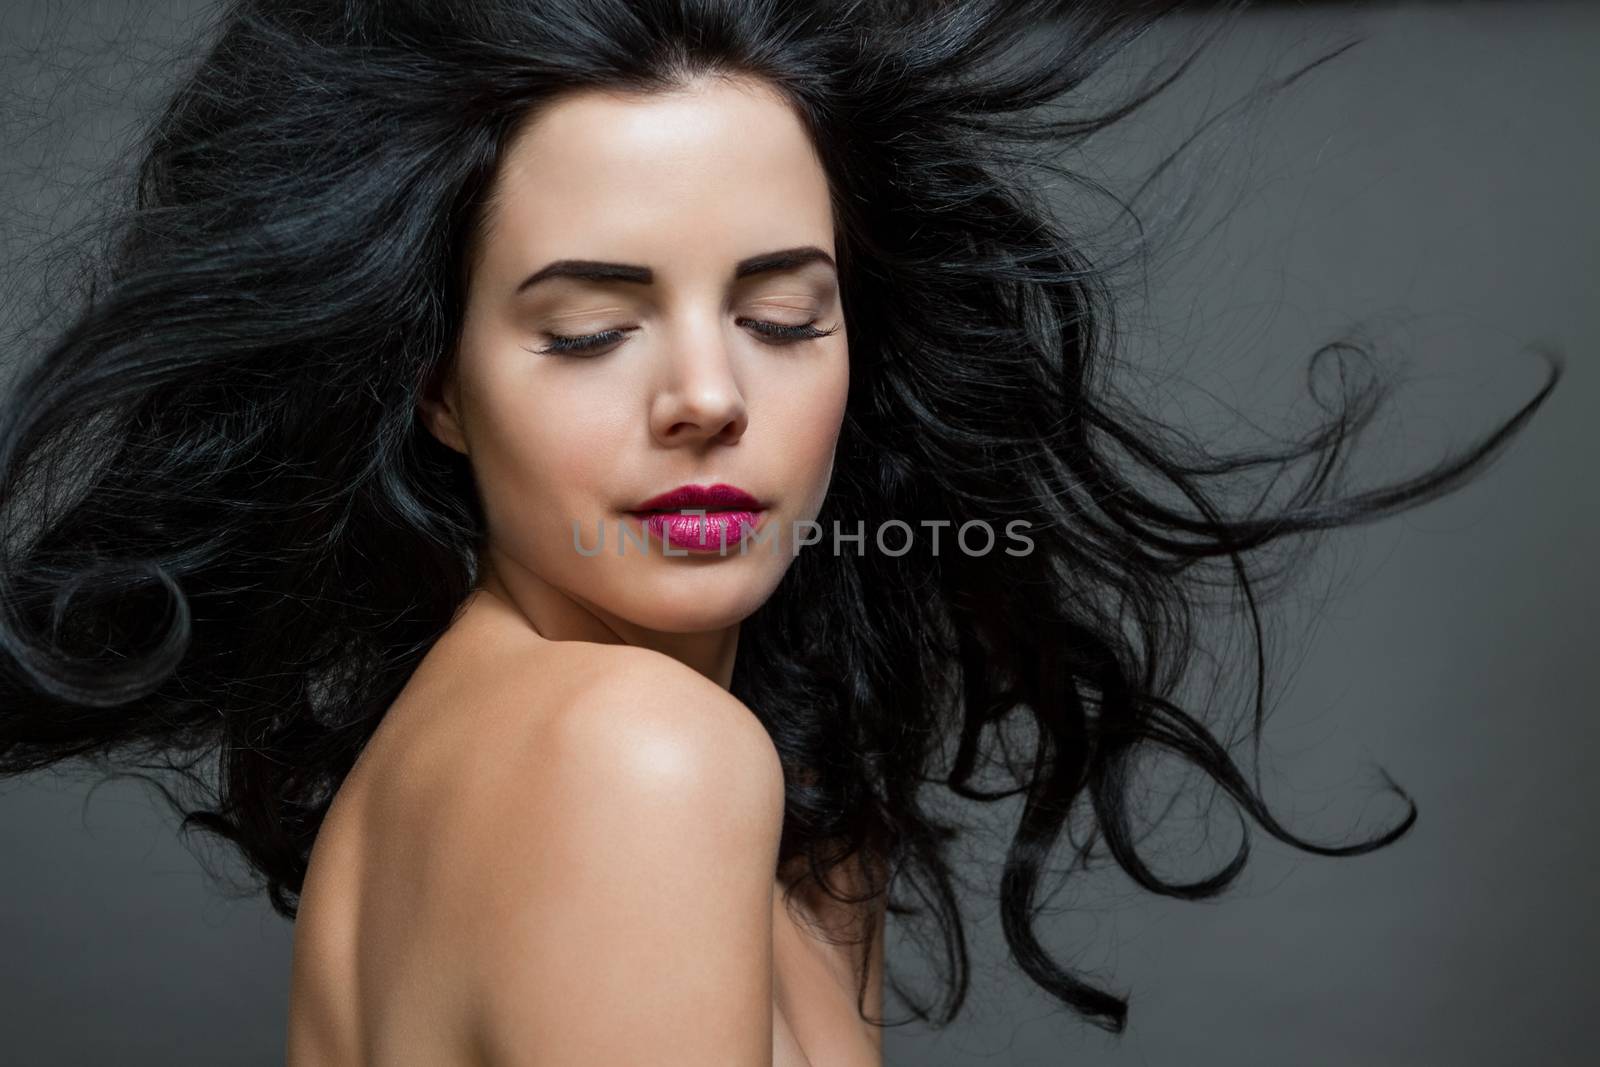 Atmospheric studio portrait of a beautiful black haired woman with a gentle serene expression gazing over her naked shoulder directly at the camera, close up head and shoulders against black